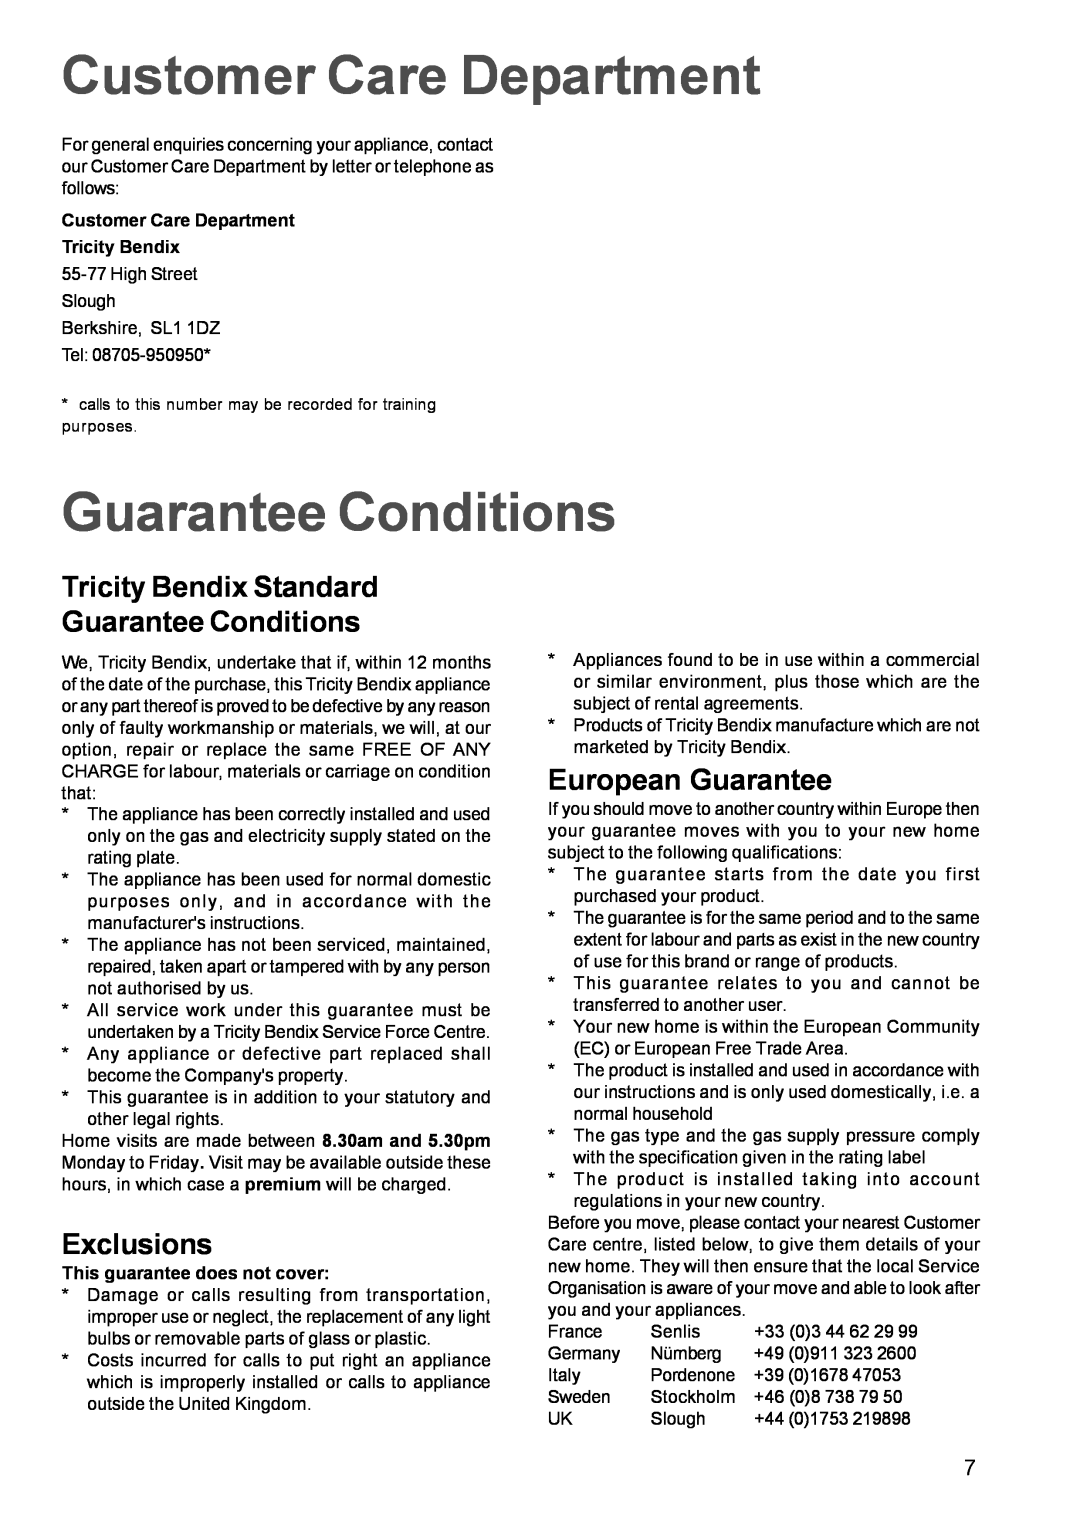 Tricity Bendix TBE 635 manual Customer Care Department, Tricity Bendix Standard Guarantee Conditions, Exclusions 